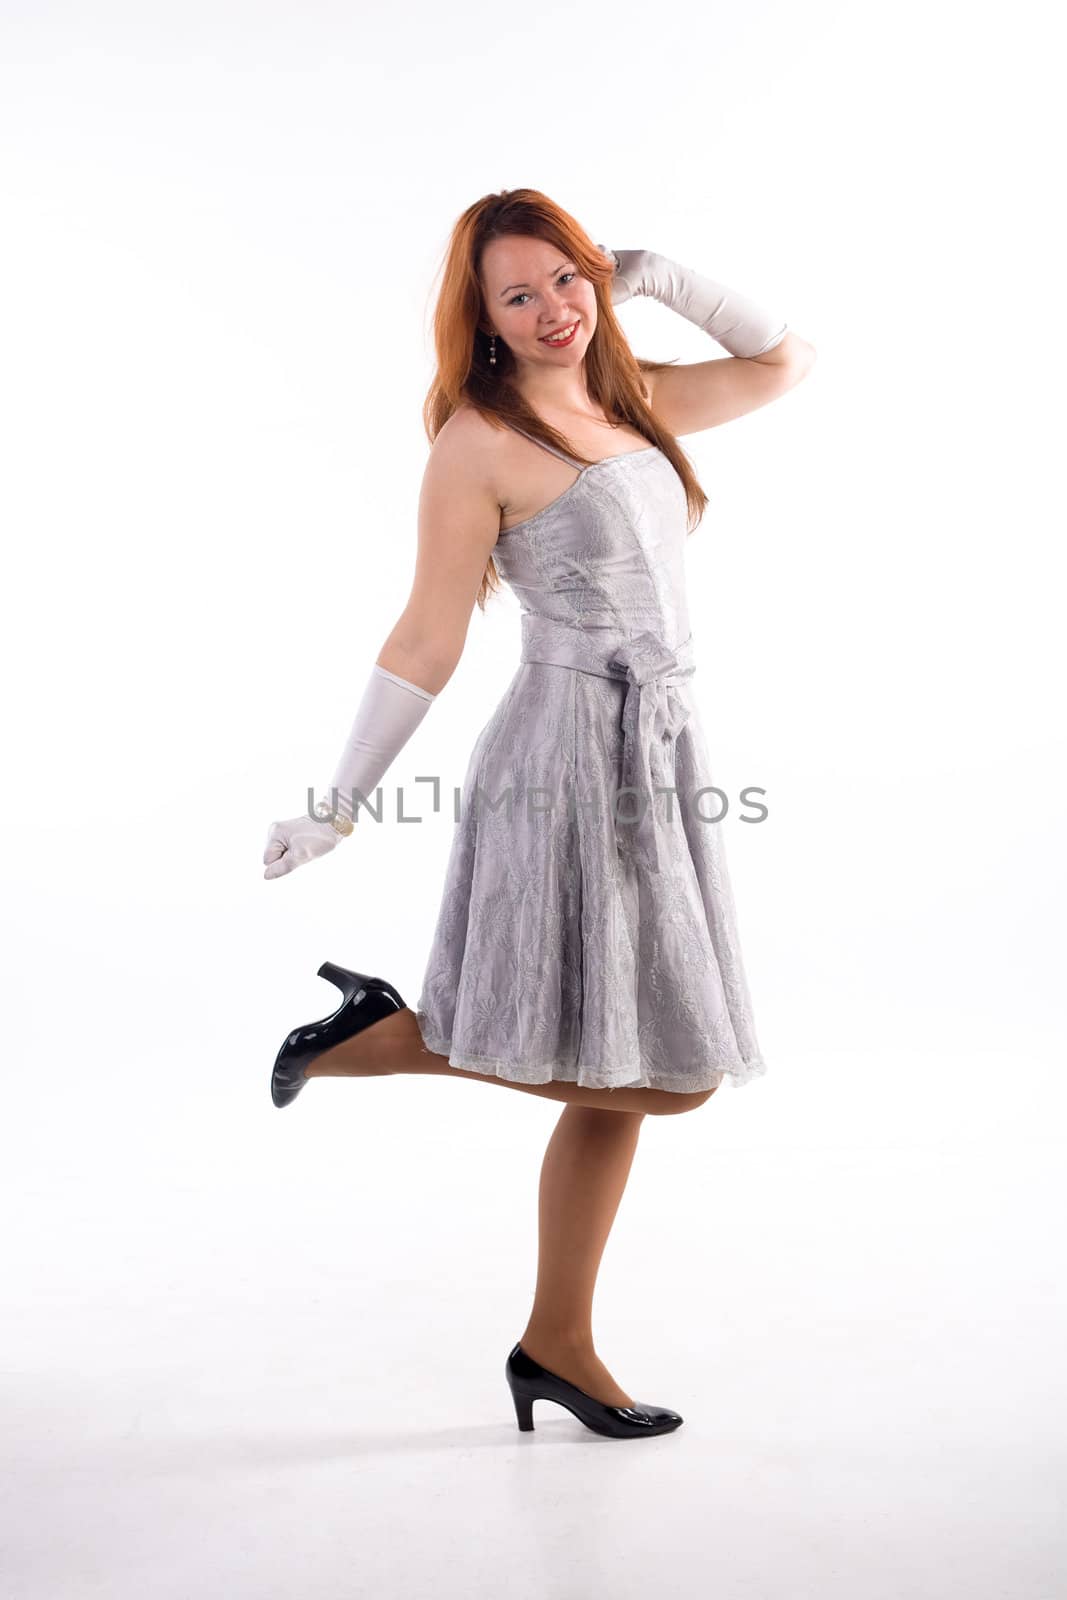 Young girl with white gloves standing on white background
